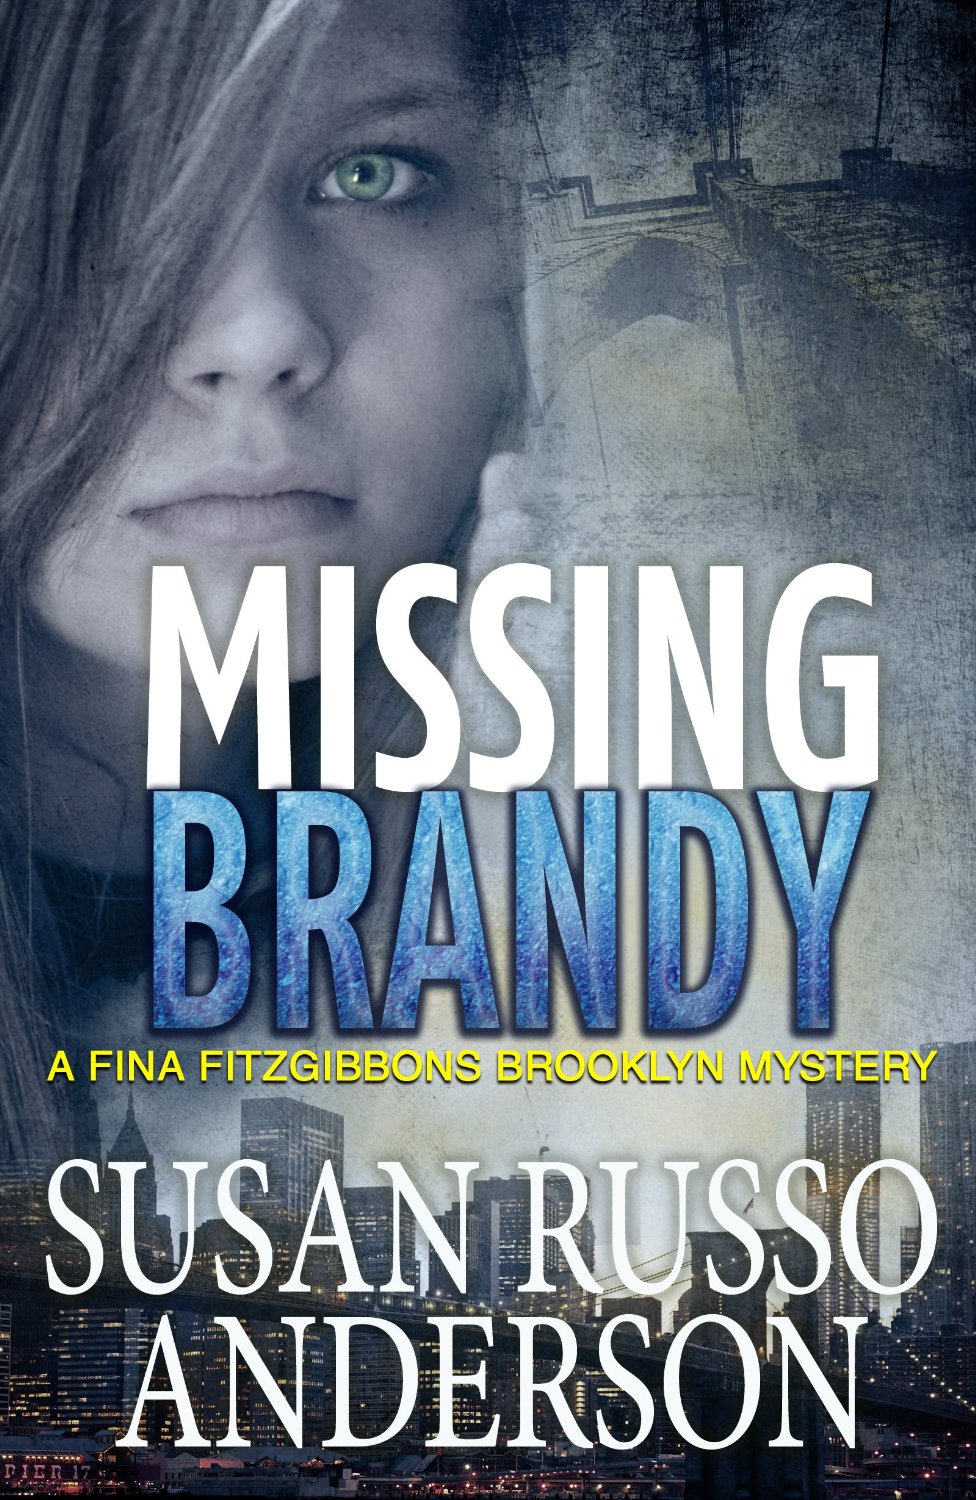 Missing Brandy (A Fina Fitzgibbons Brooklyn Mystery Book 2) by Susan Russo Anderson